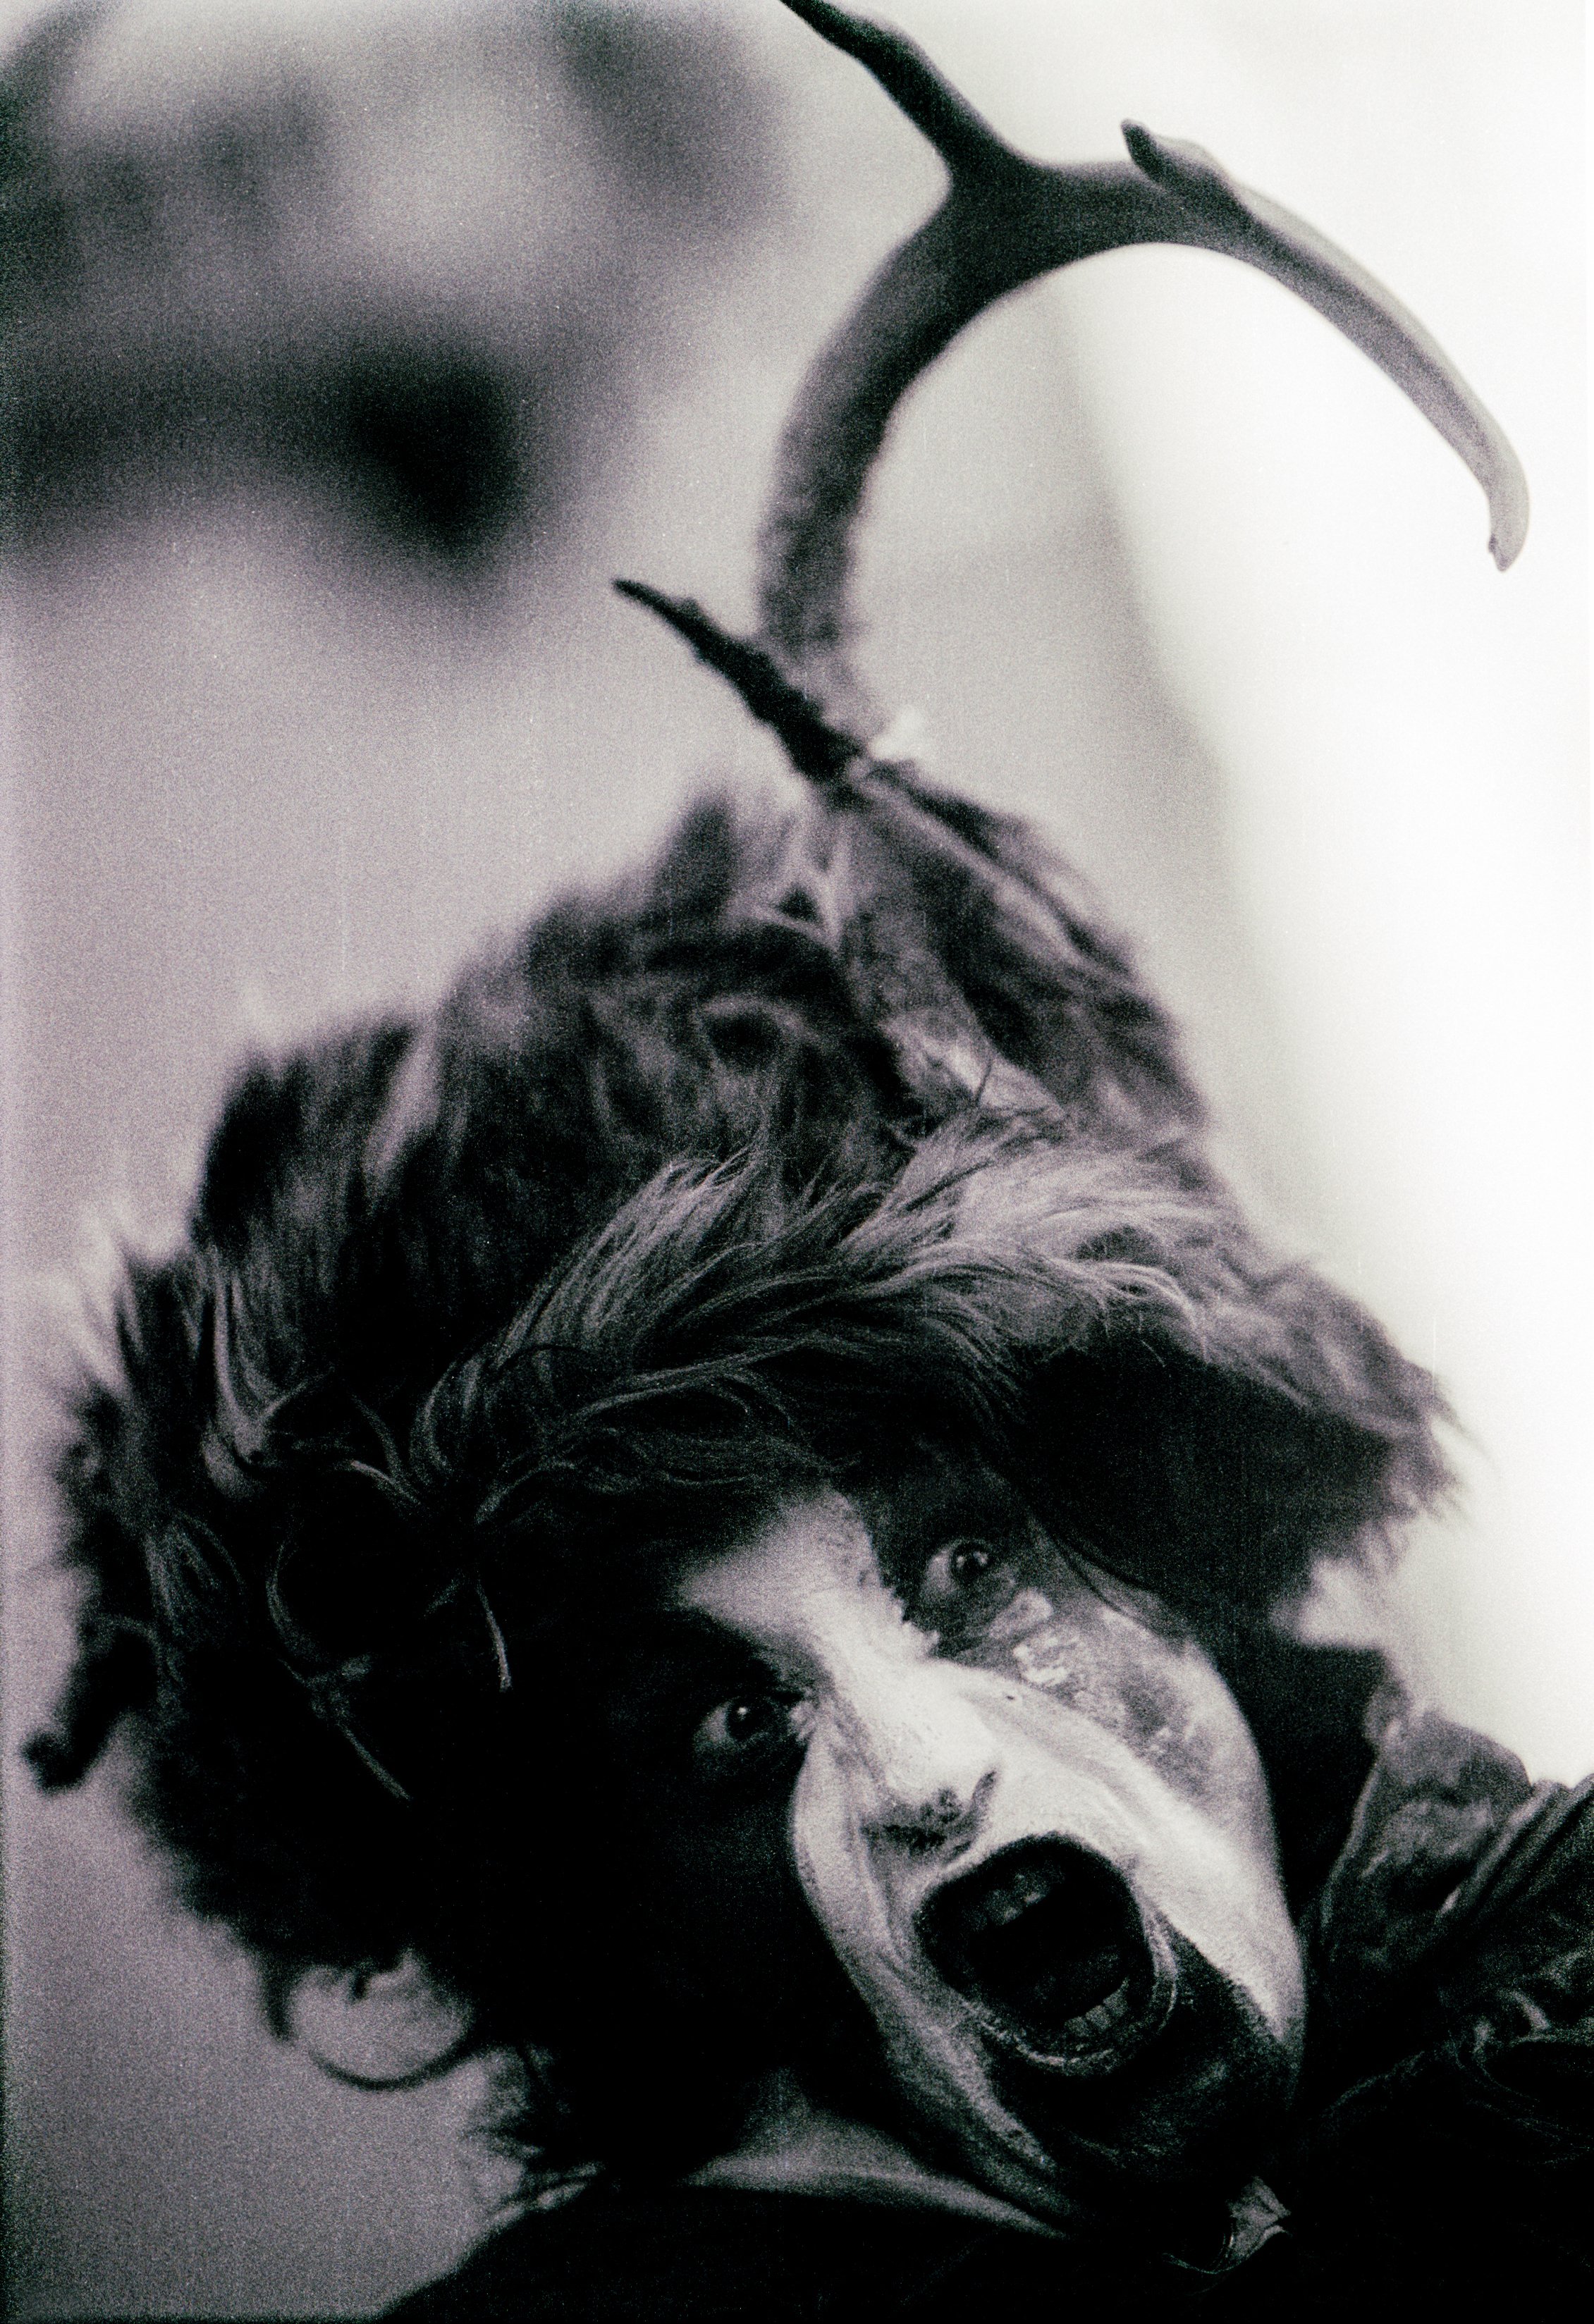 Patriot American Man with Antlers Portrait 34th st NYC B&W Film Official FINAL Cropped.jpg